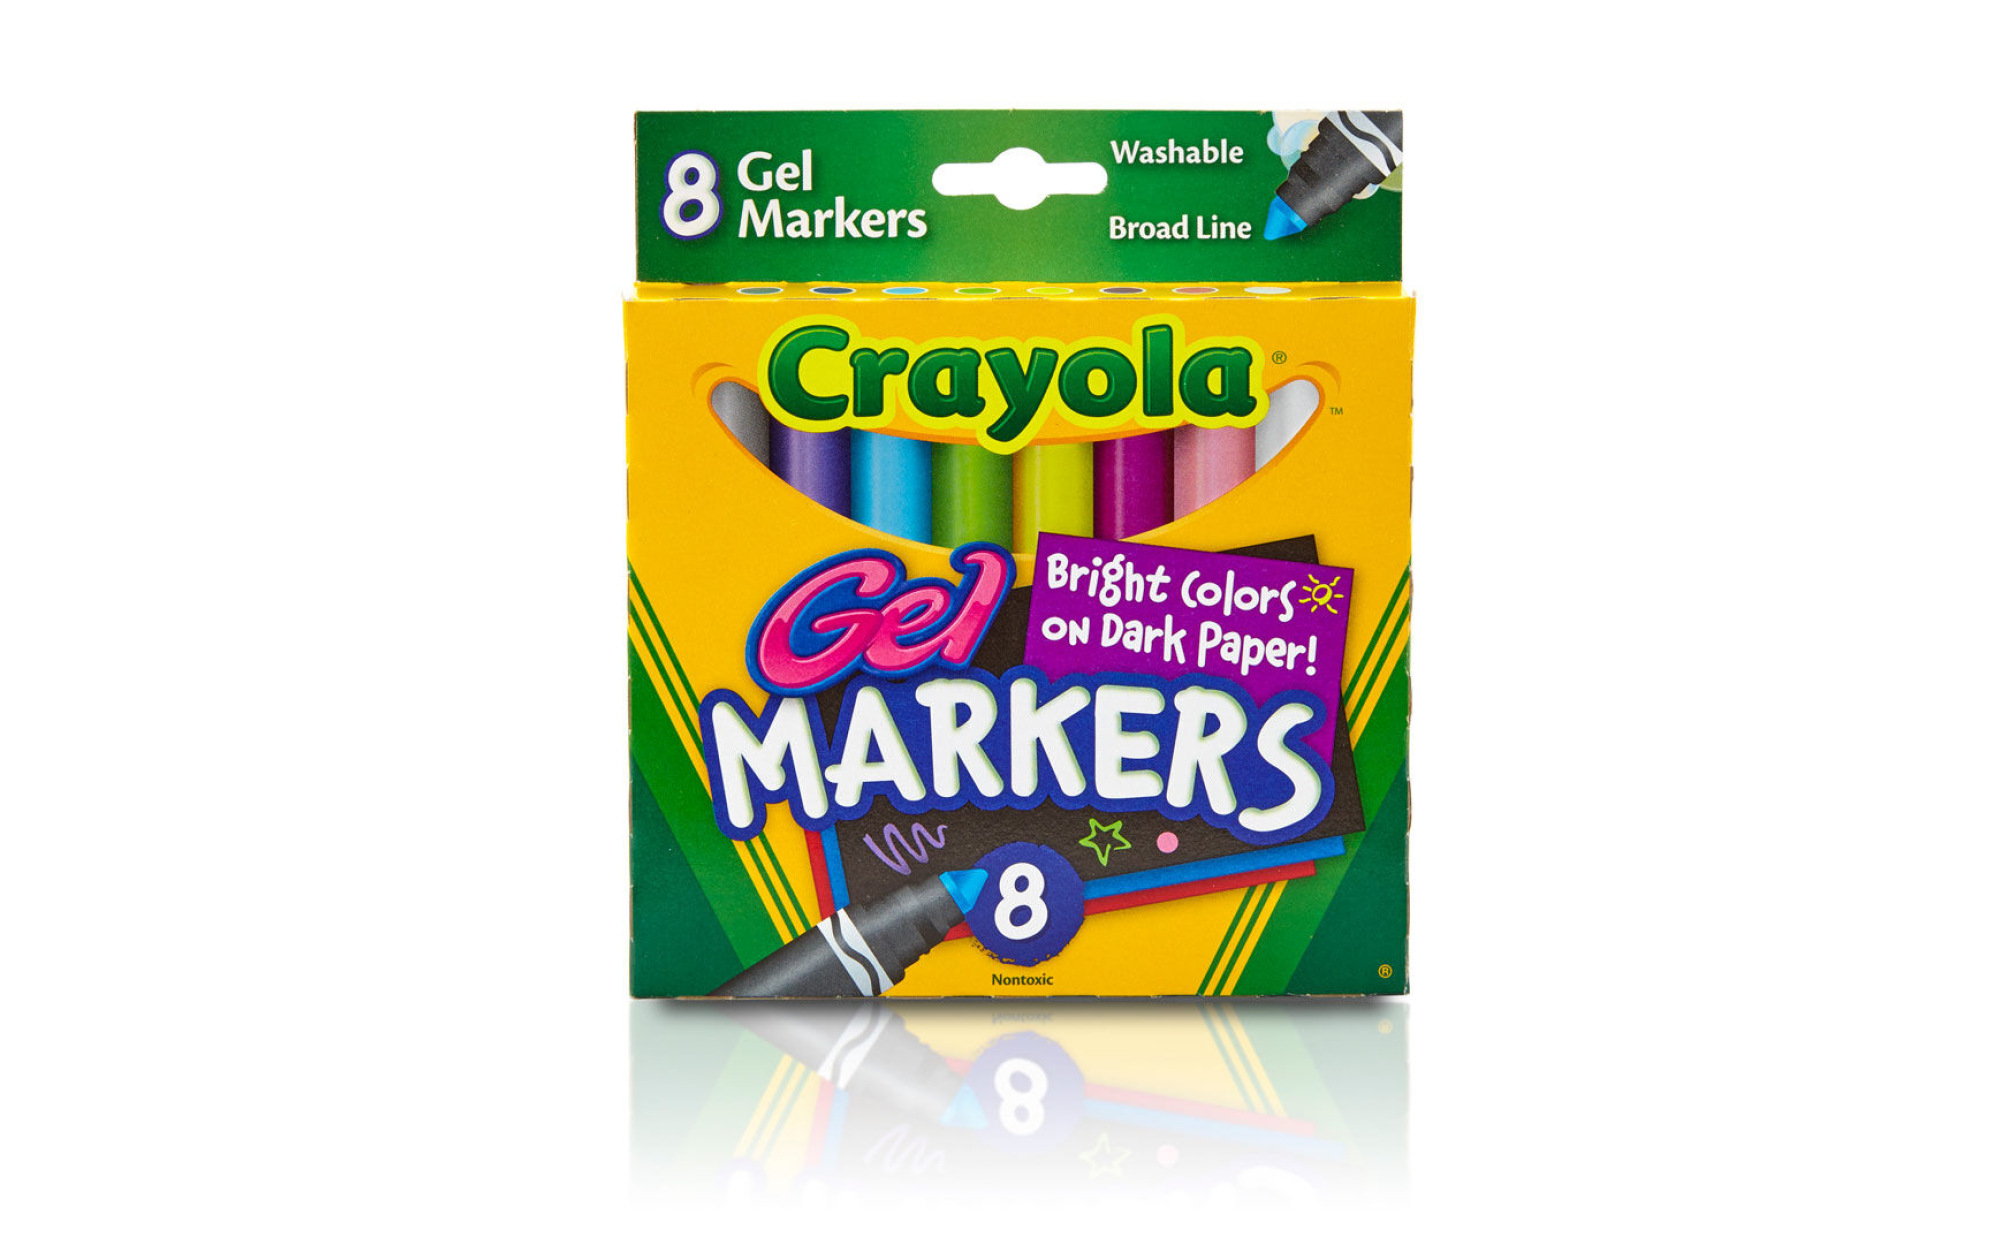 Washable Window Markers for Kids, 8 Count, Crayola.com